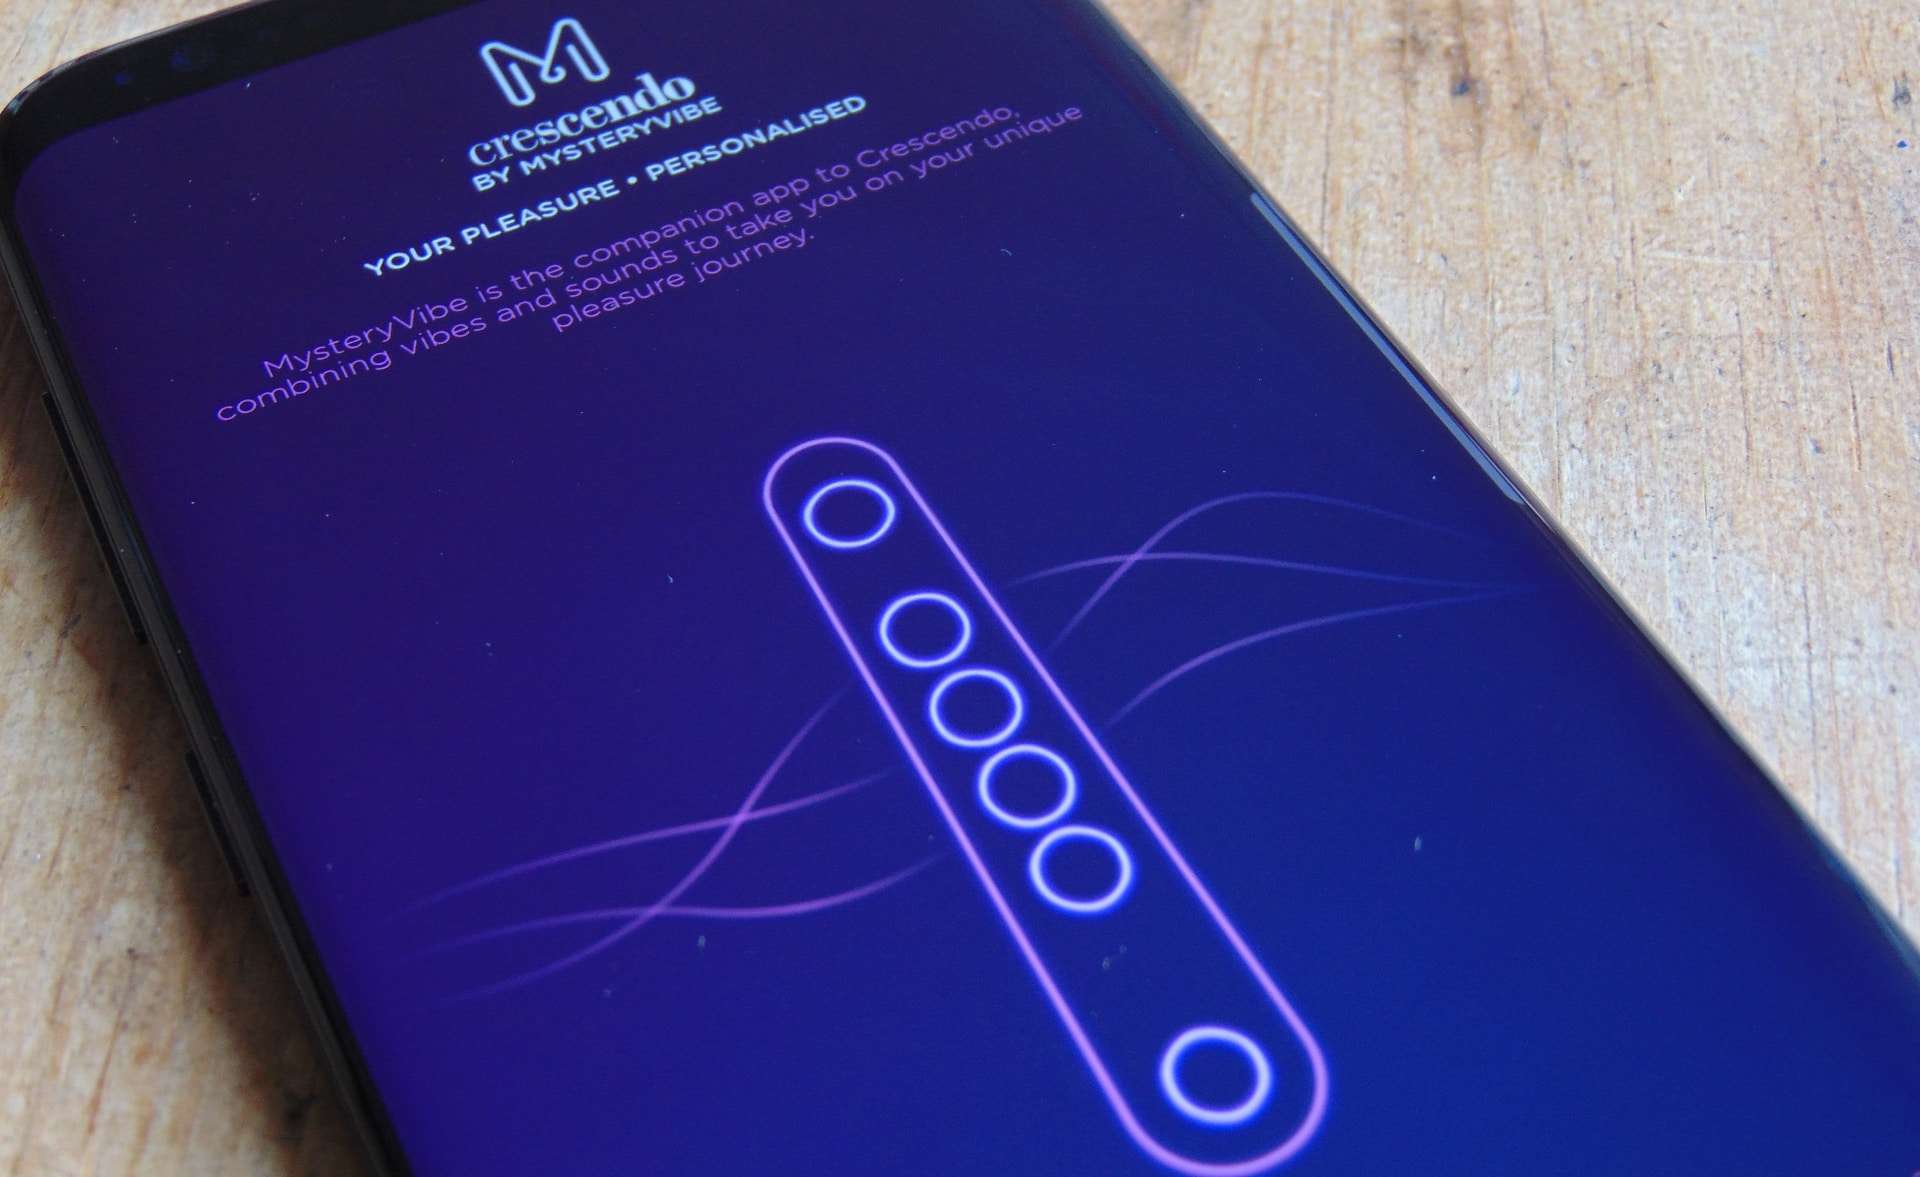 MysteryVibe app update lets you create your own Samsung galaxy s7 edge patterns.